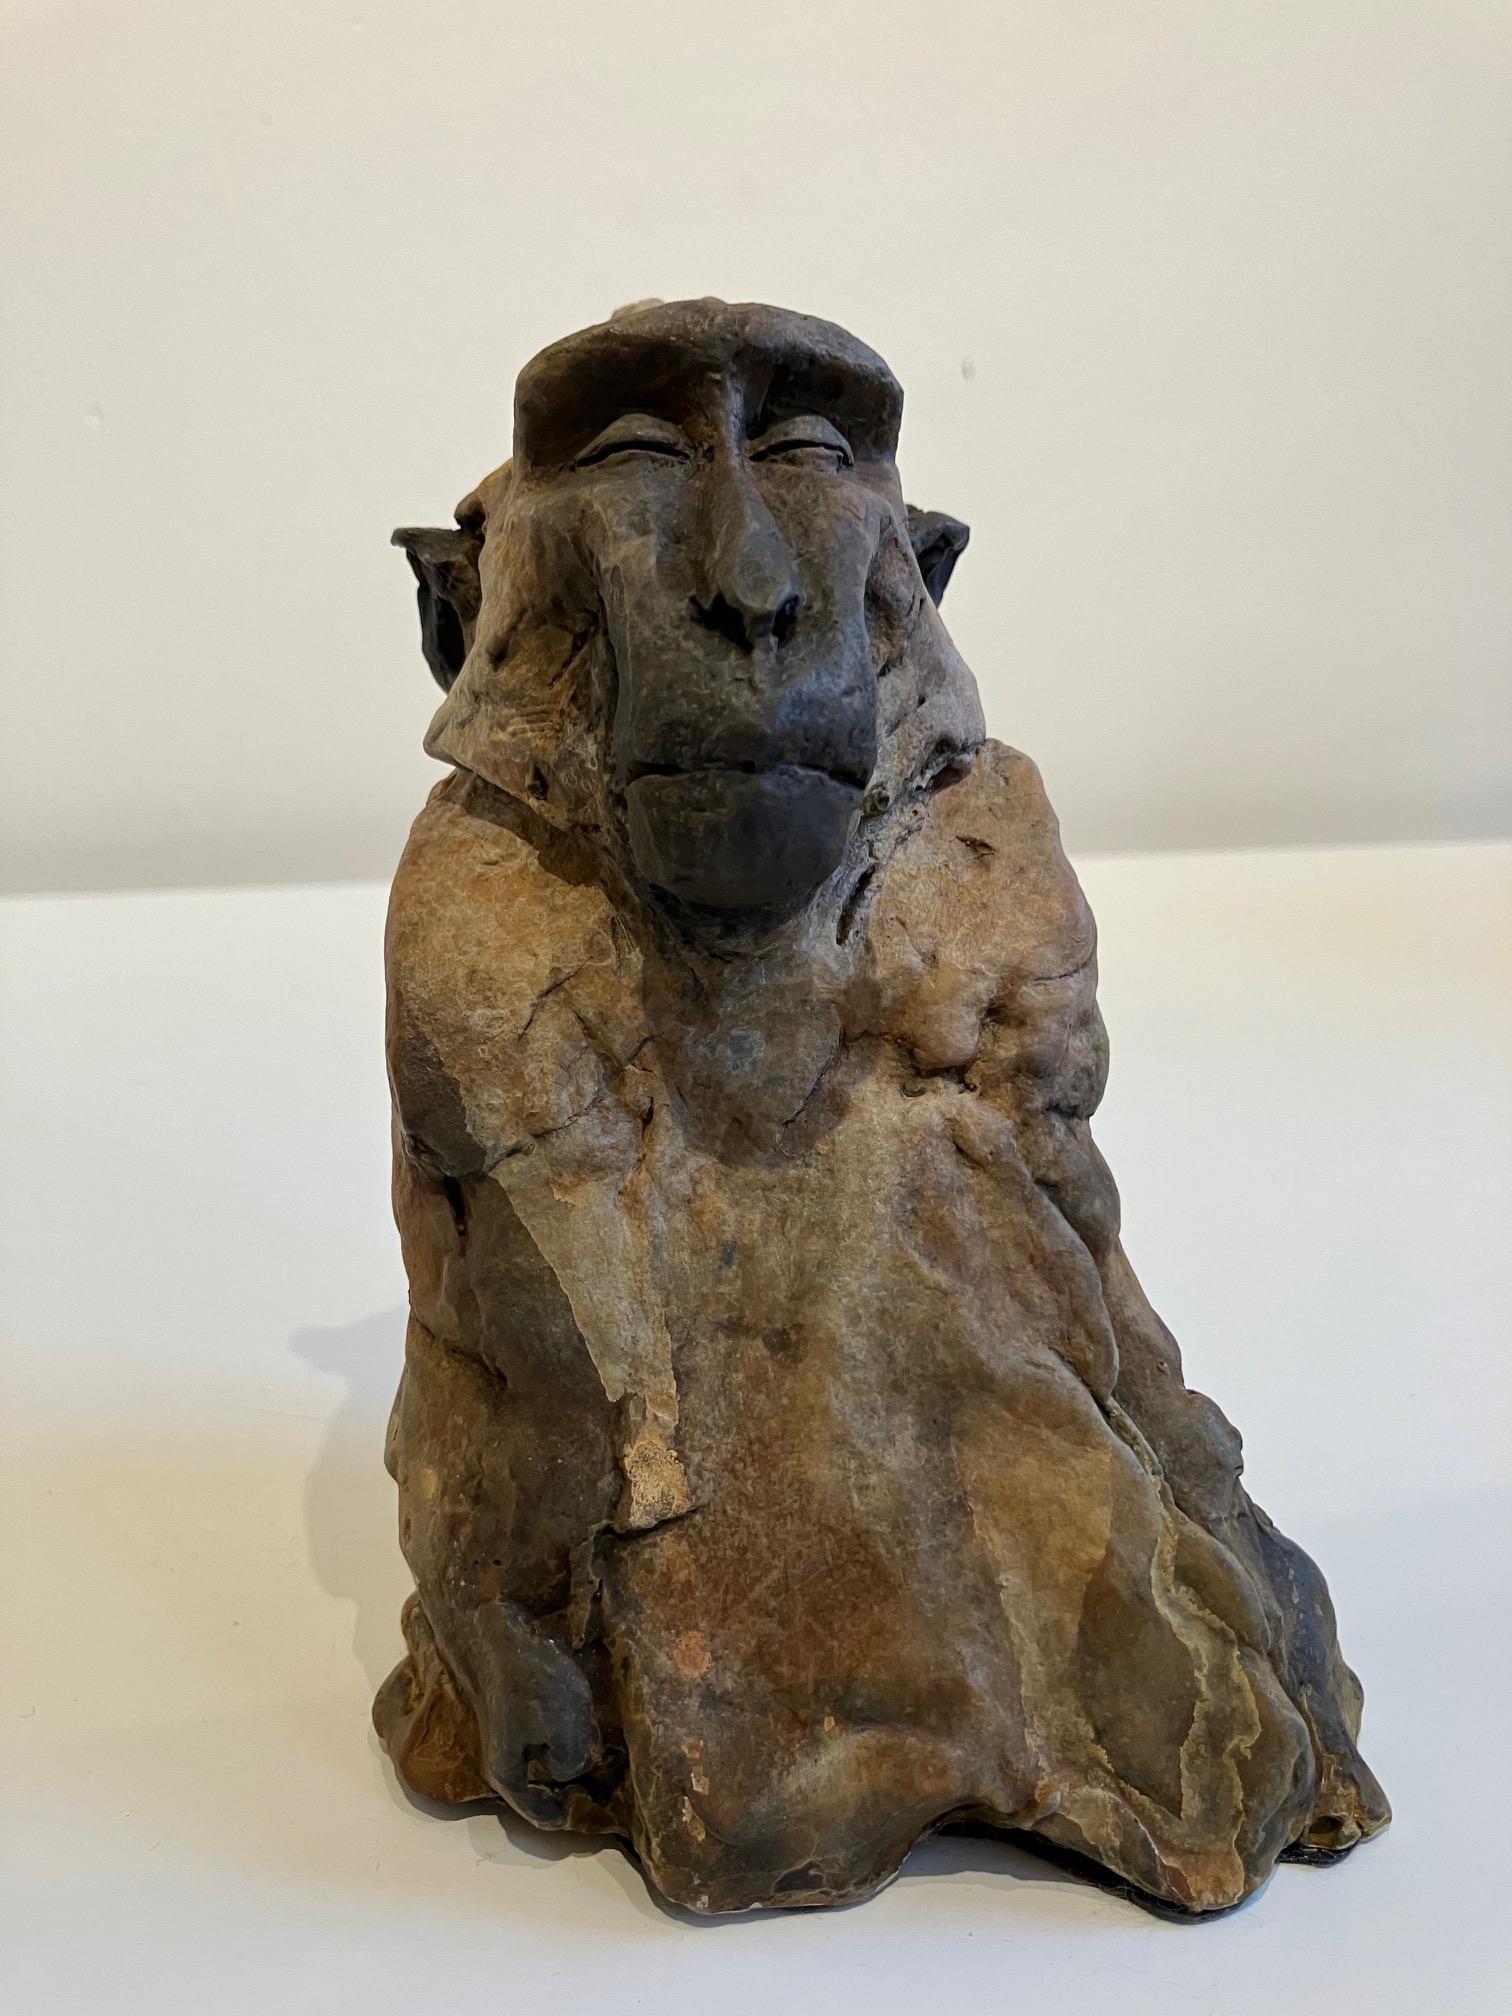 Nichola Theakston (1967) has established herself as one of the UK’s foremost contemporary sculptors working within the animal genre. 

Primates are Nichola's favorite subject. In her words: 'The notion that an individual creature may experience some